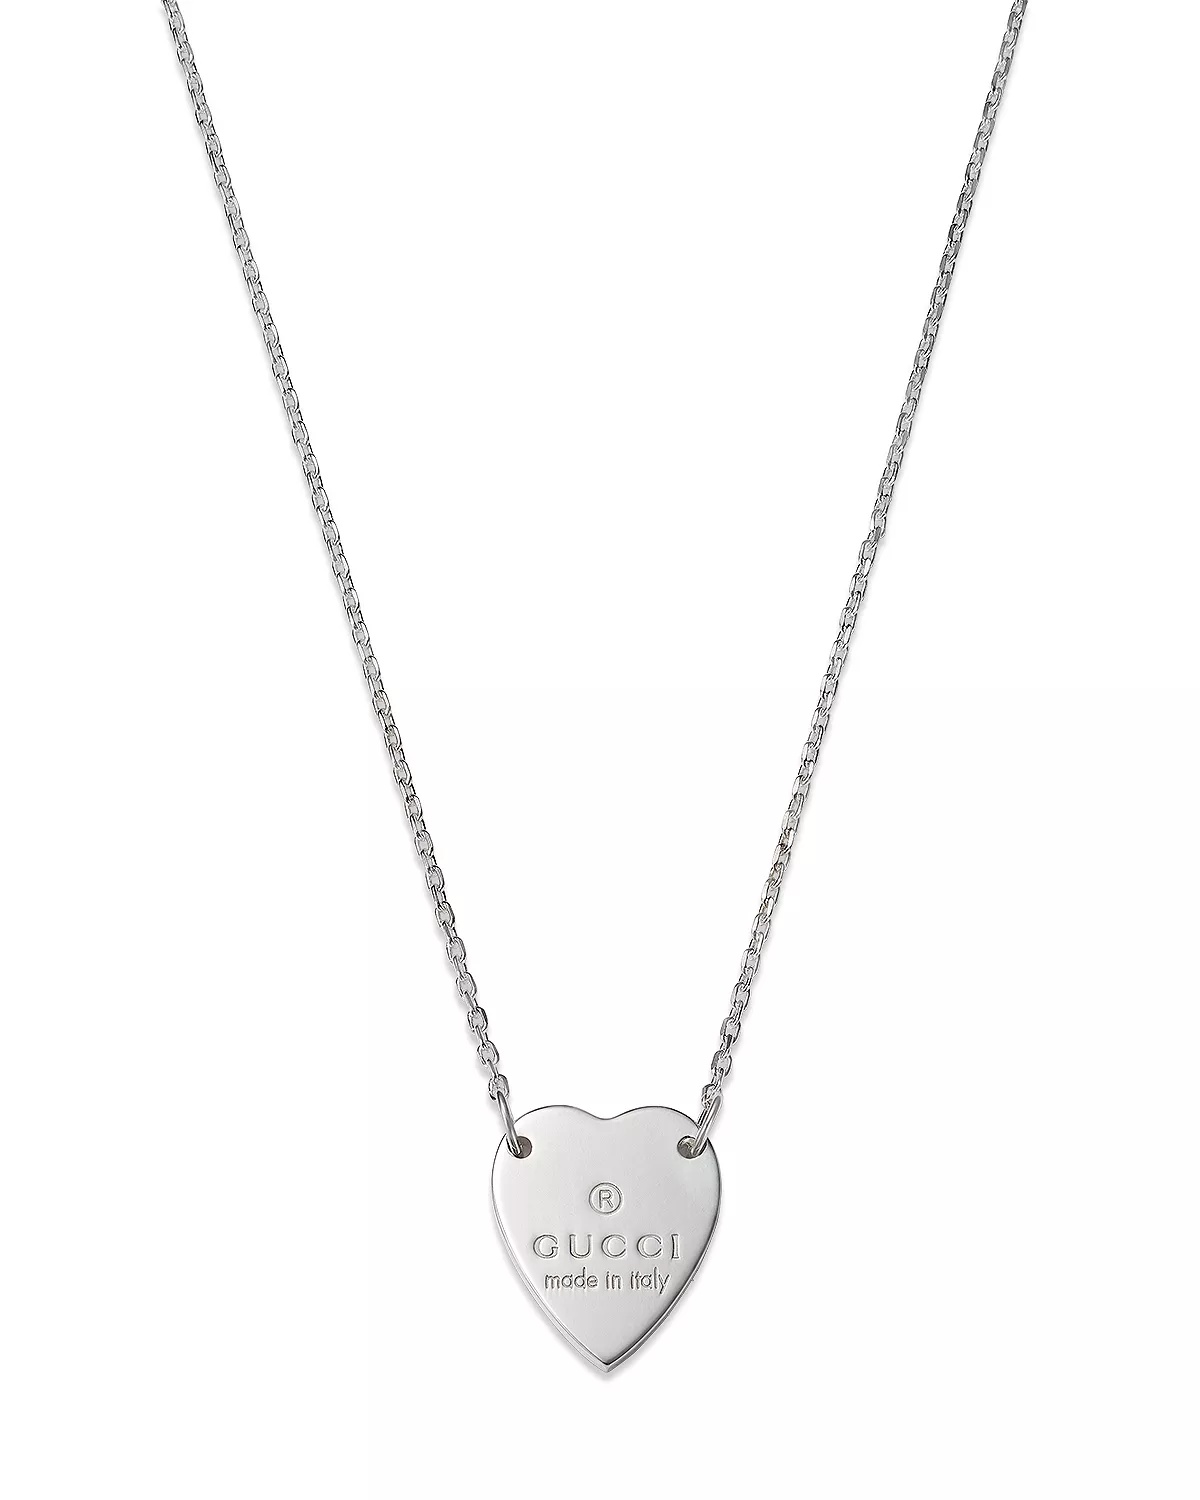 Sterling Silver Engraved Trademark Heart Necklace, 18" - 1